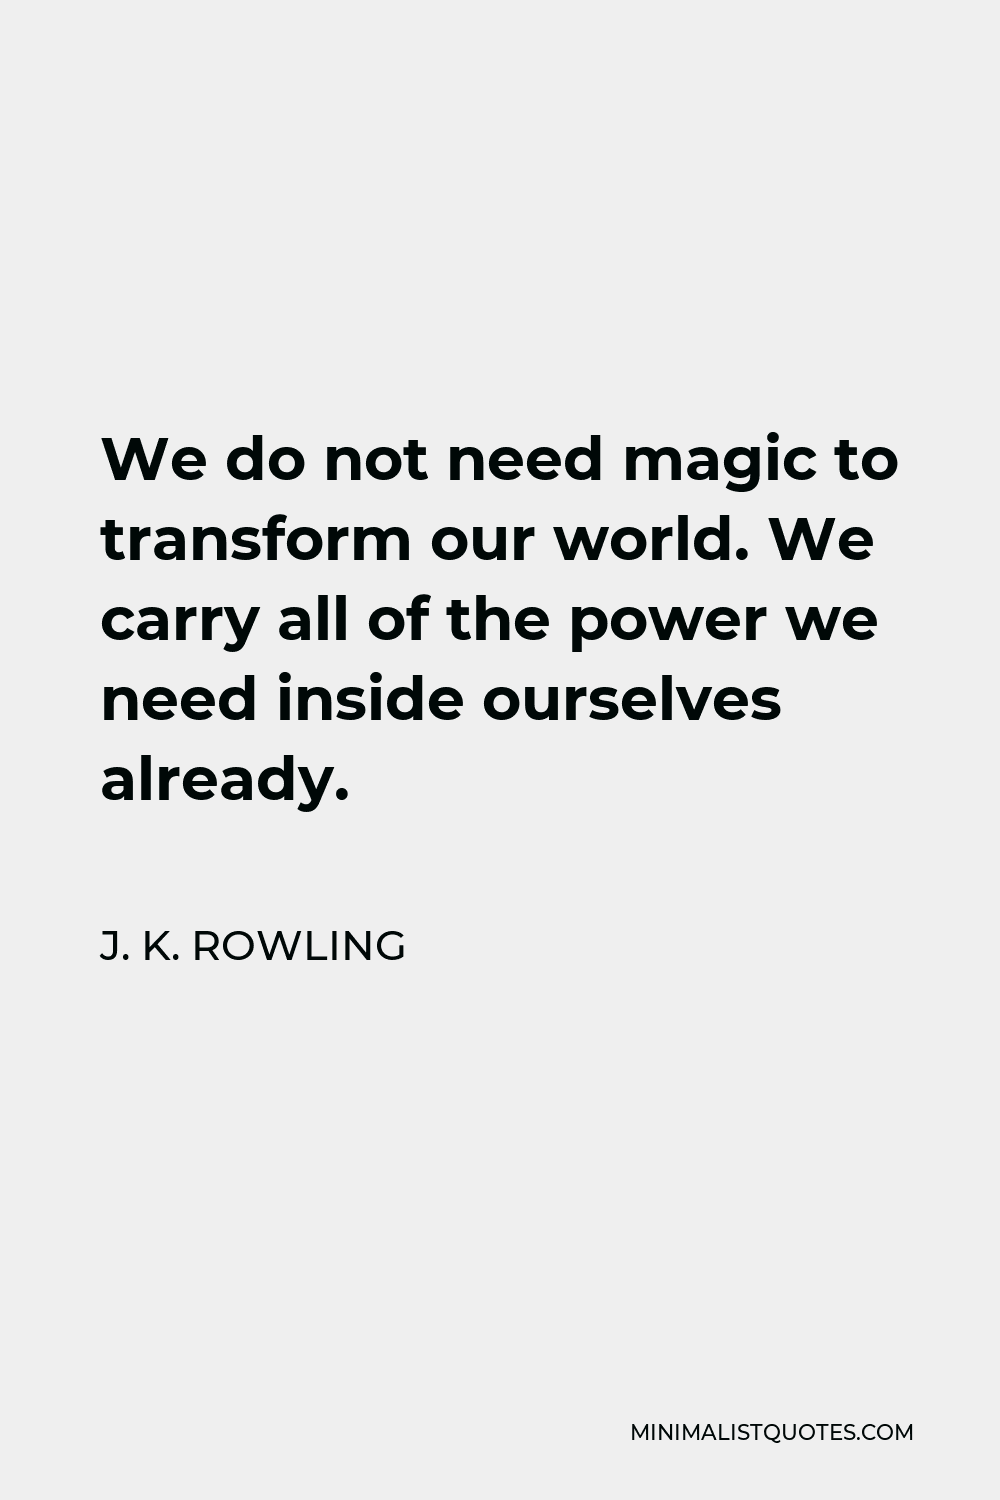 J. K. Rowling Quote - We do not need magic to transform our world. We carry all of the power we need inside ourselves already.